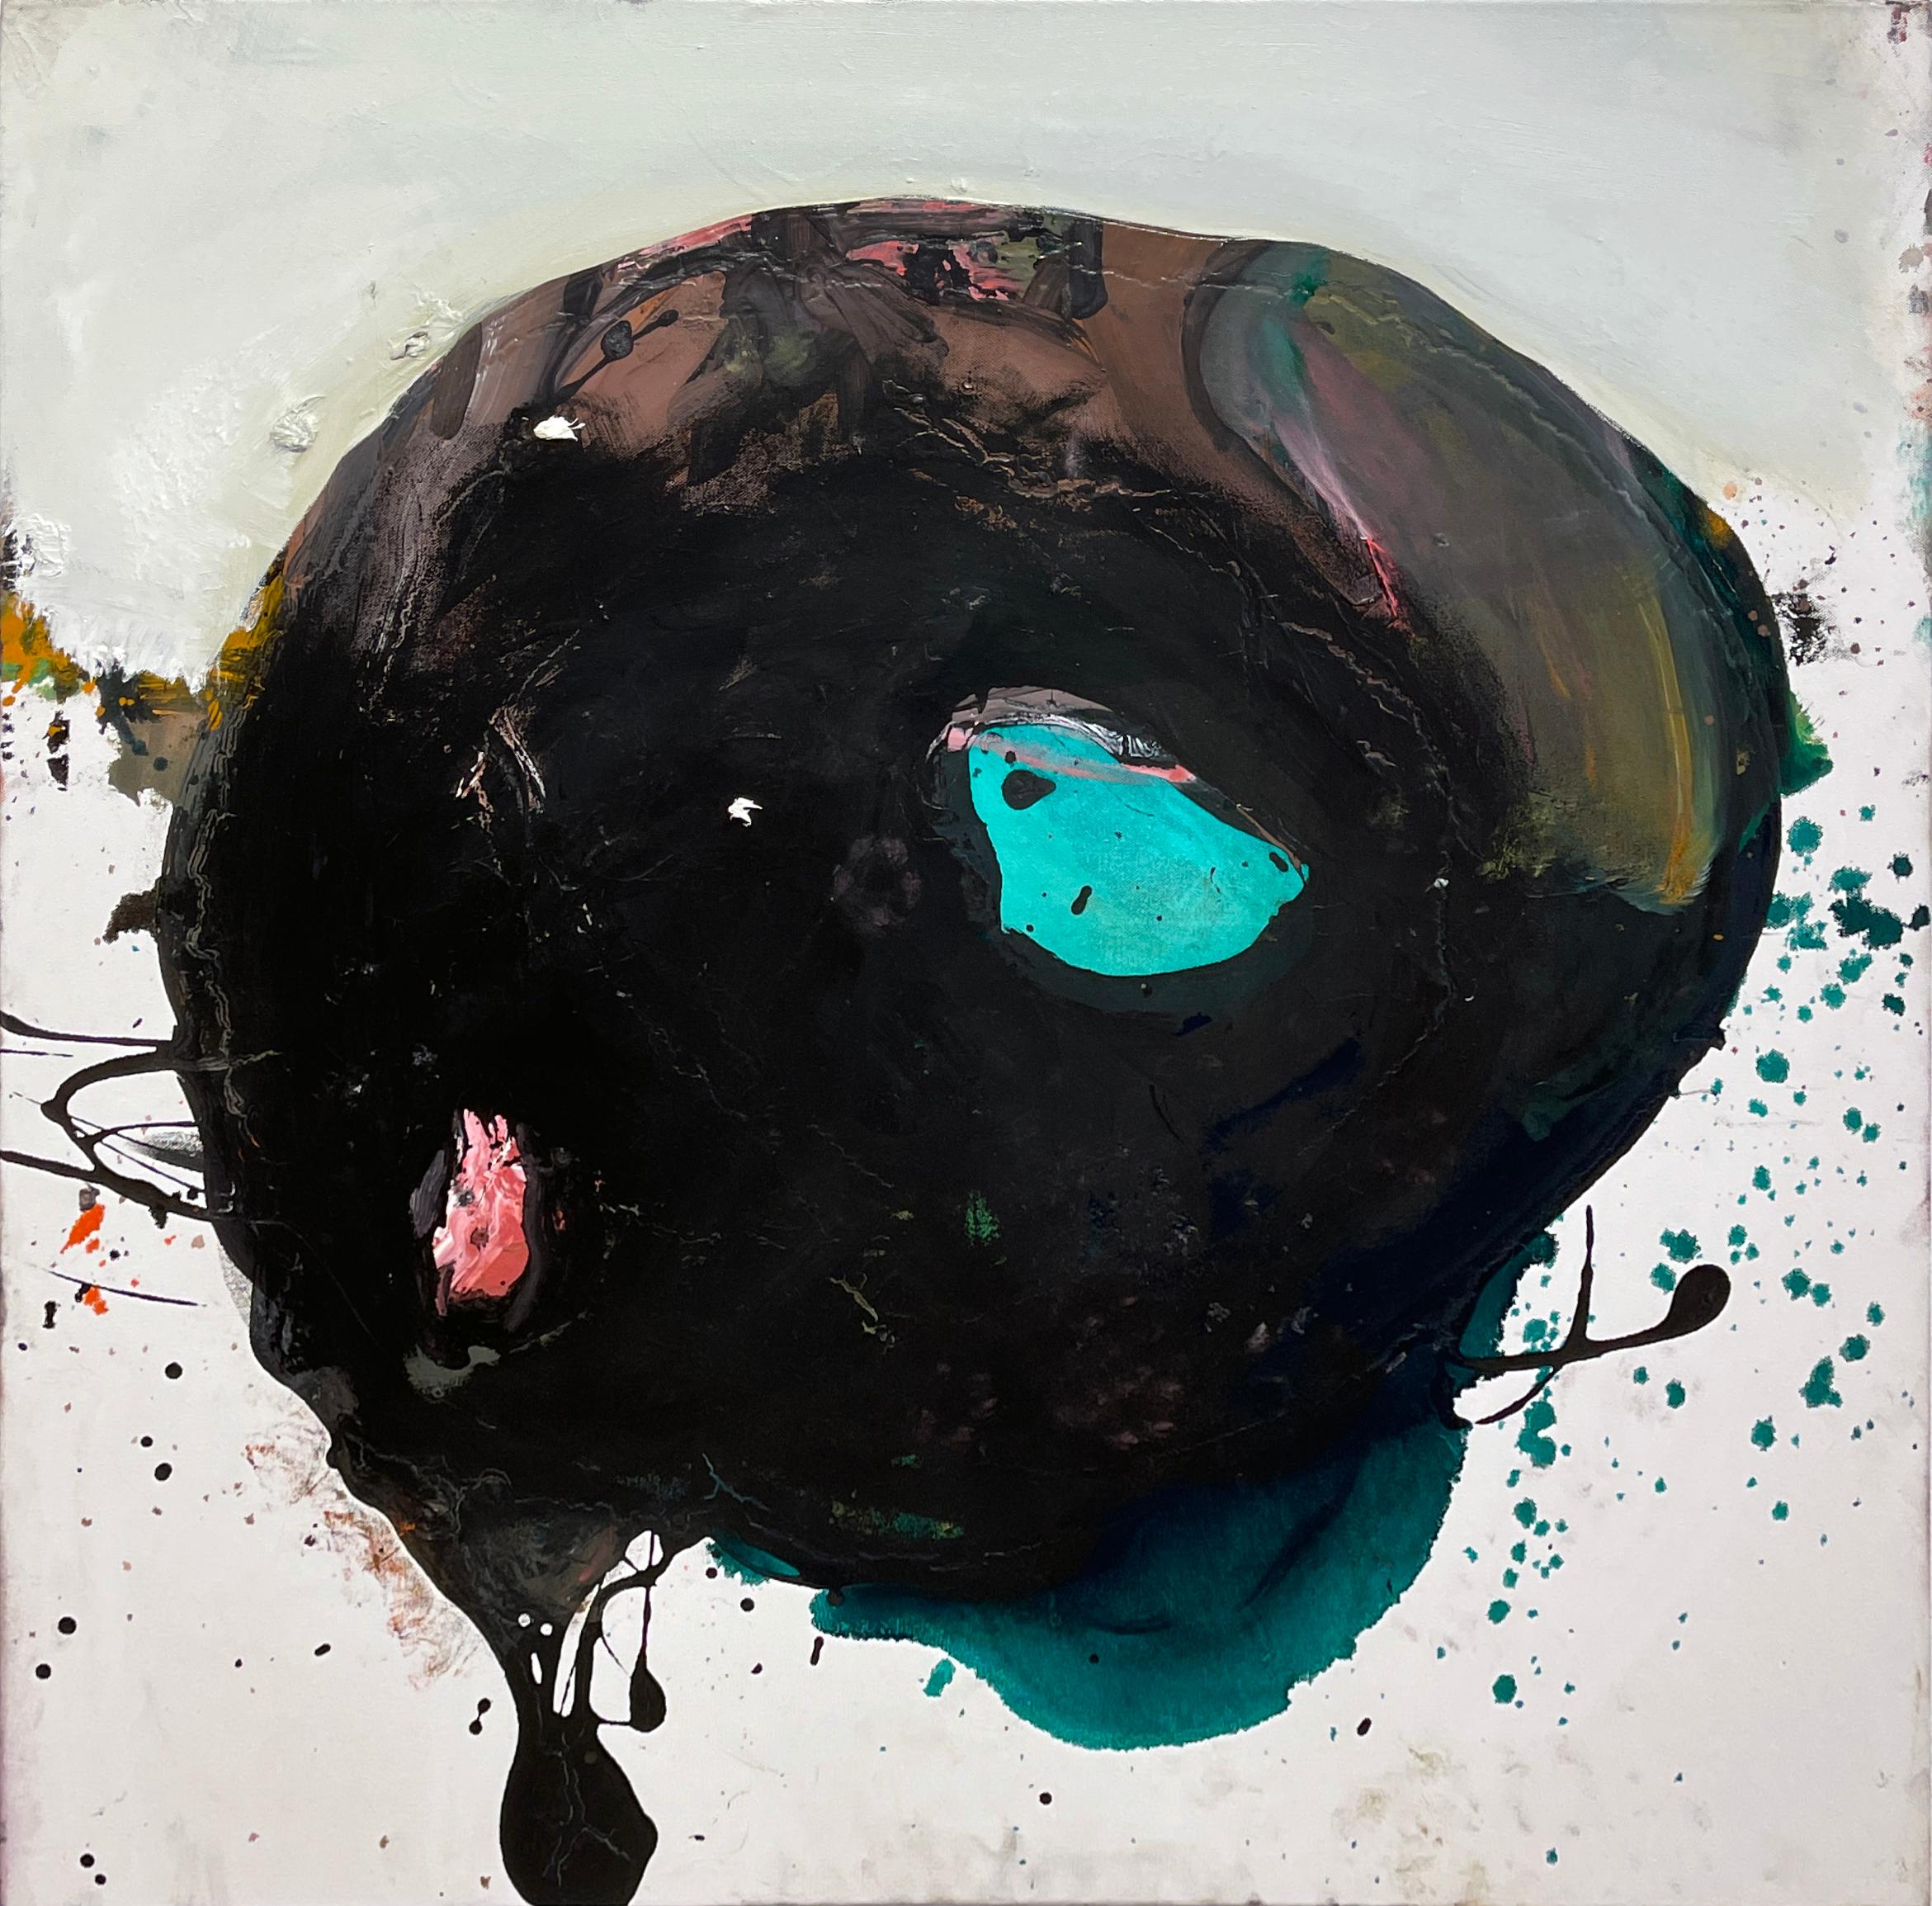 Wesley Kimler Figurative Painting - Black Blizzard, Abstract Figure, Black, Turquoise and Red Amorphous Drip Shapes